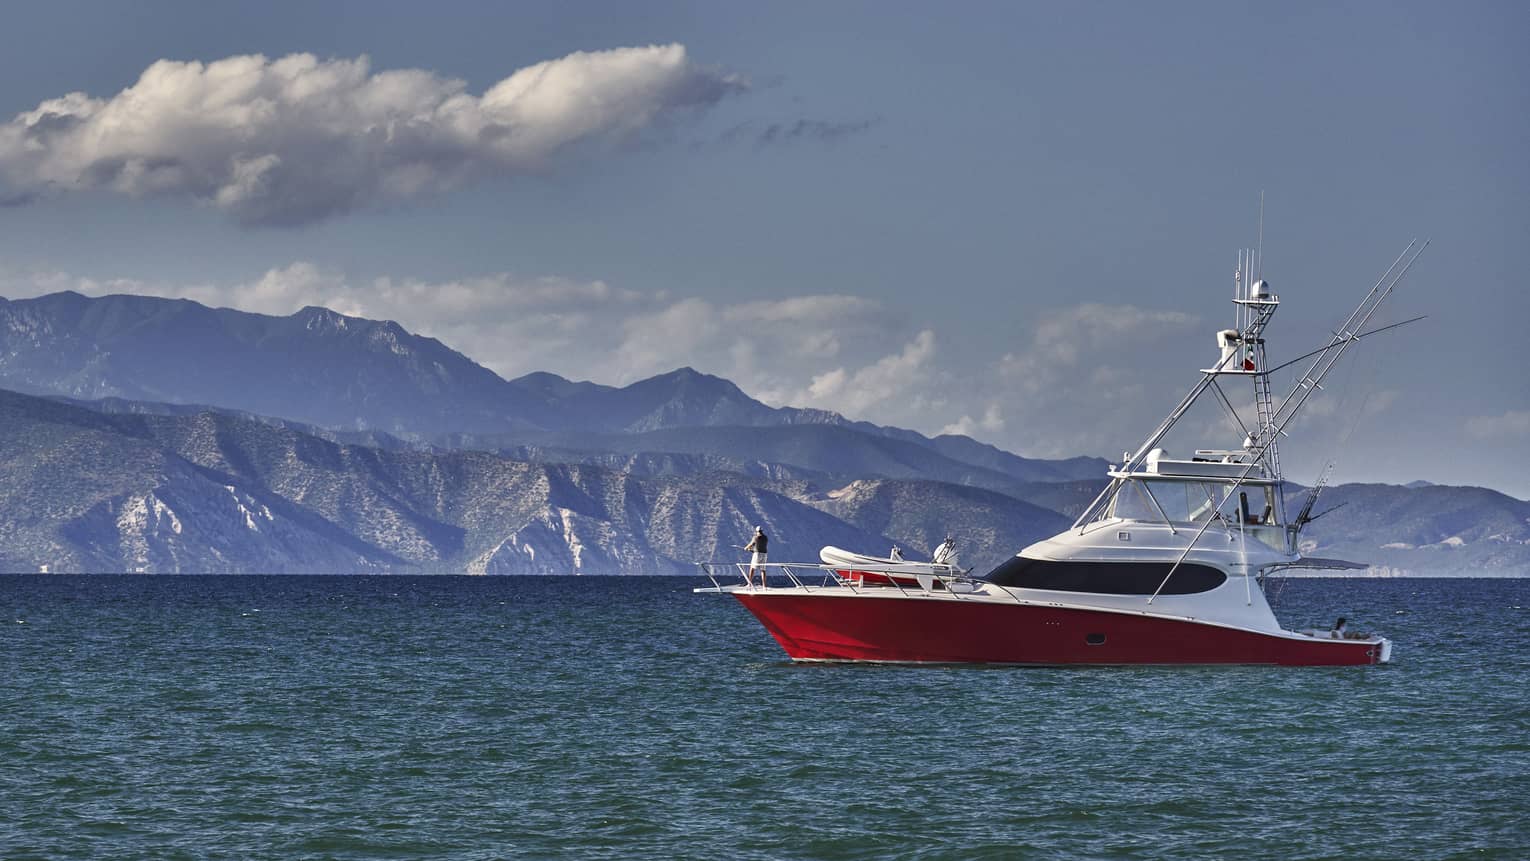 A white and red boat on the water with mountains in the distance.